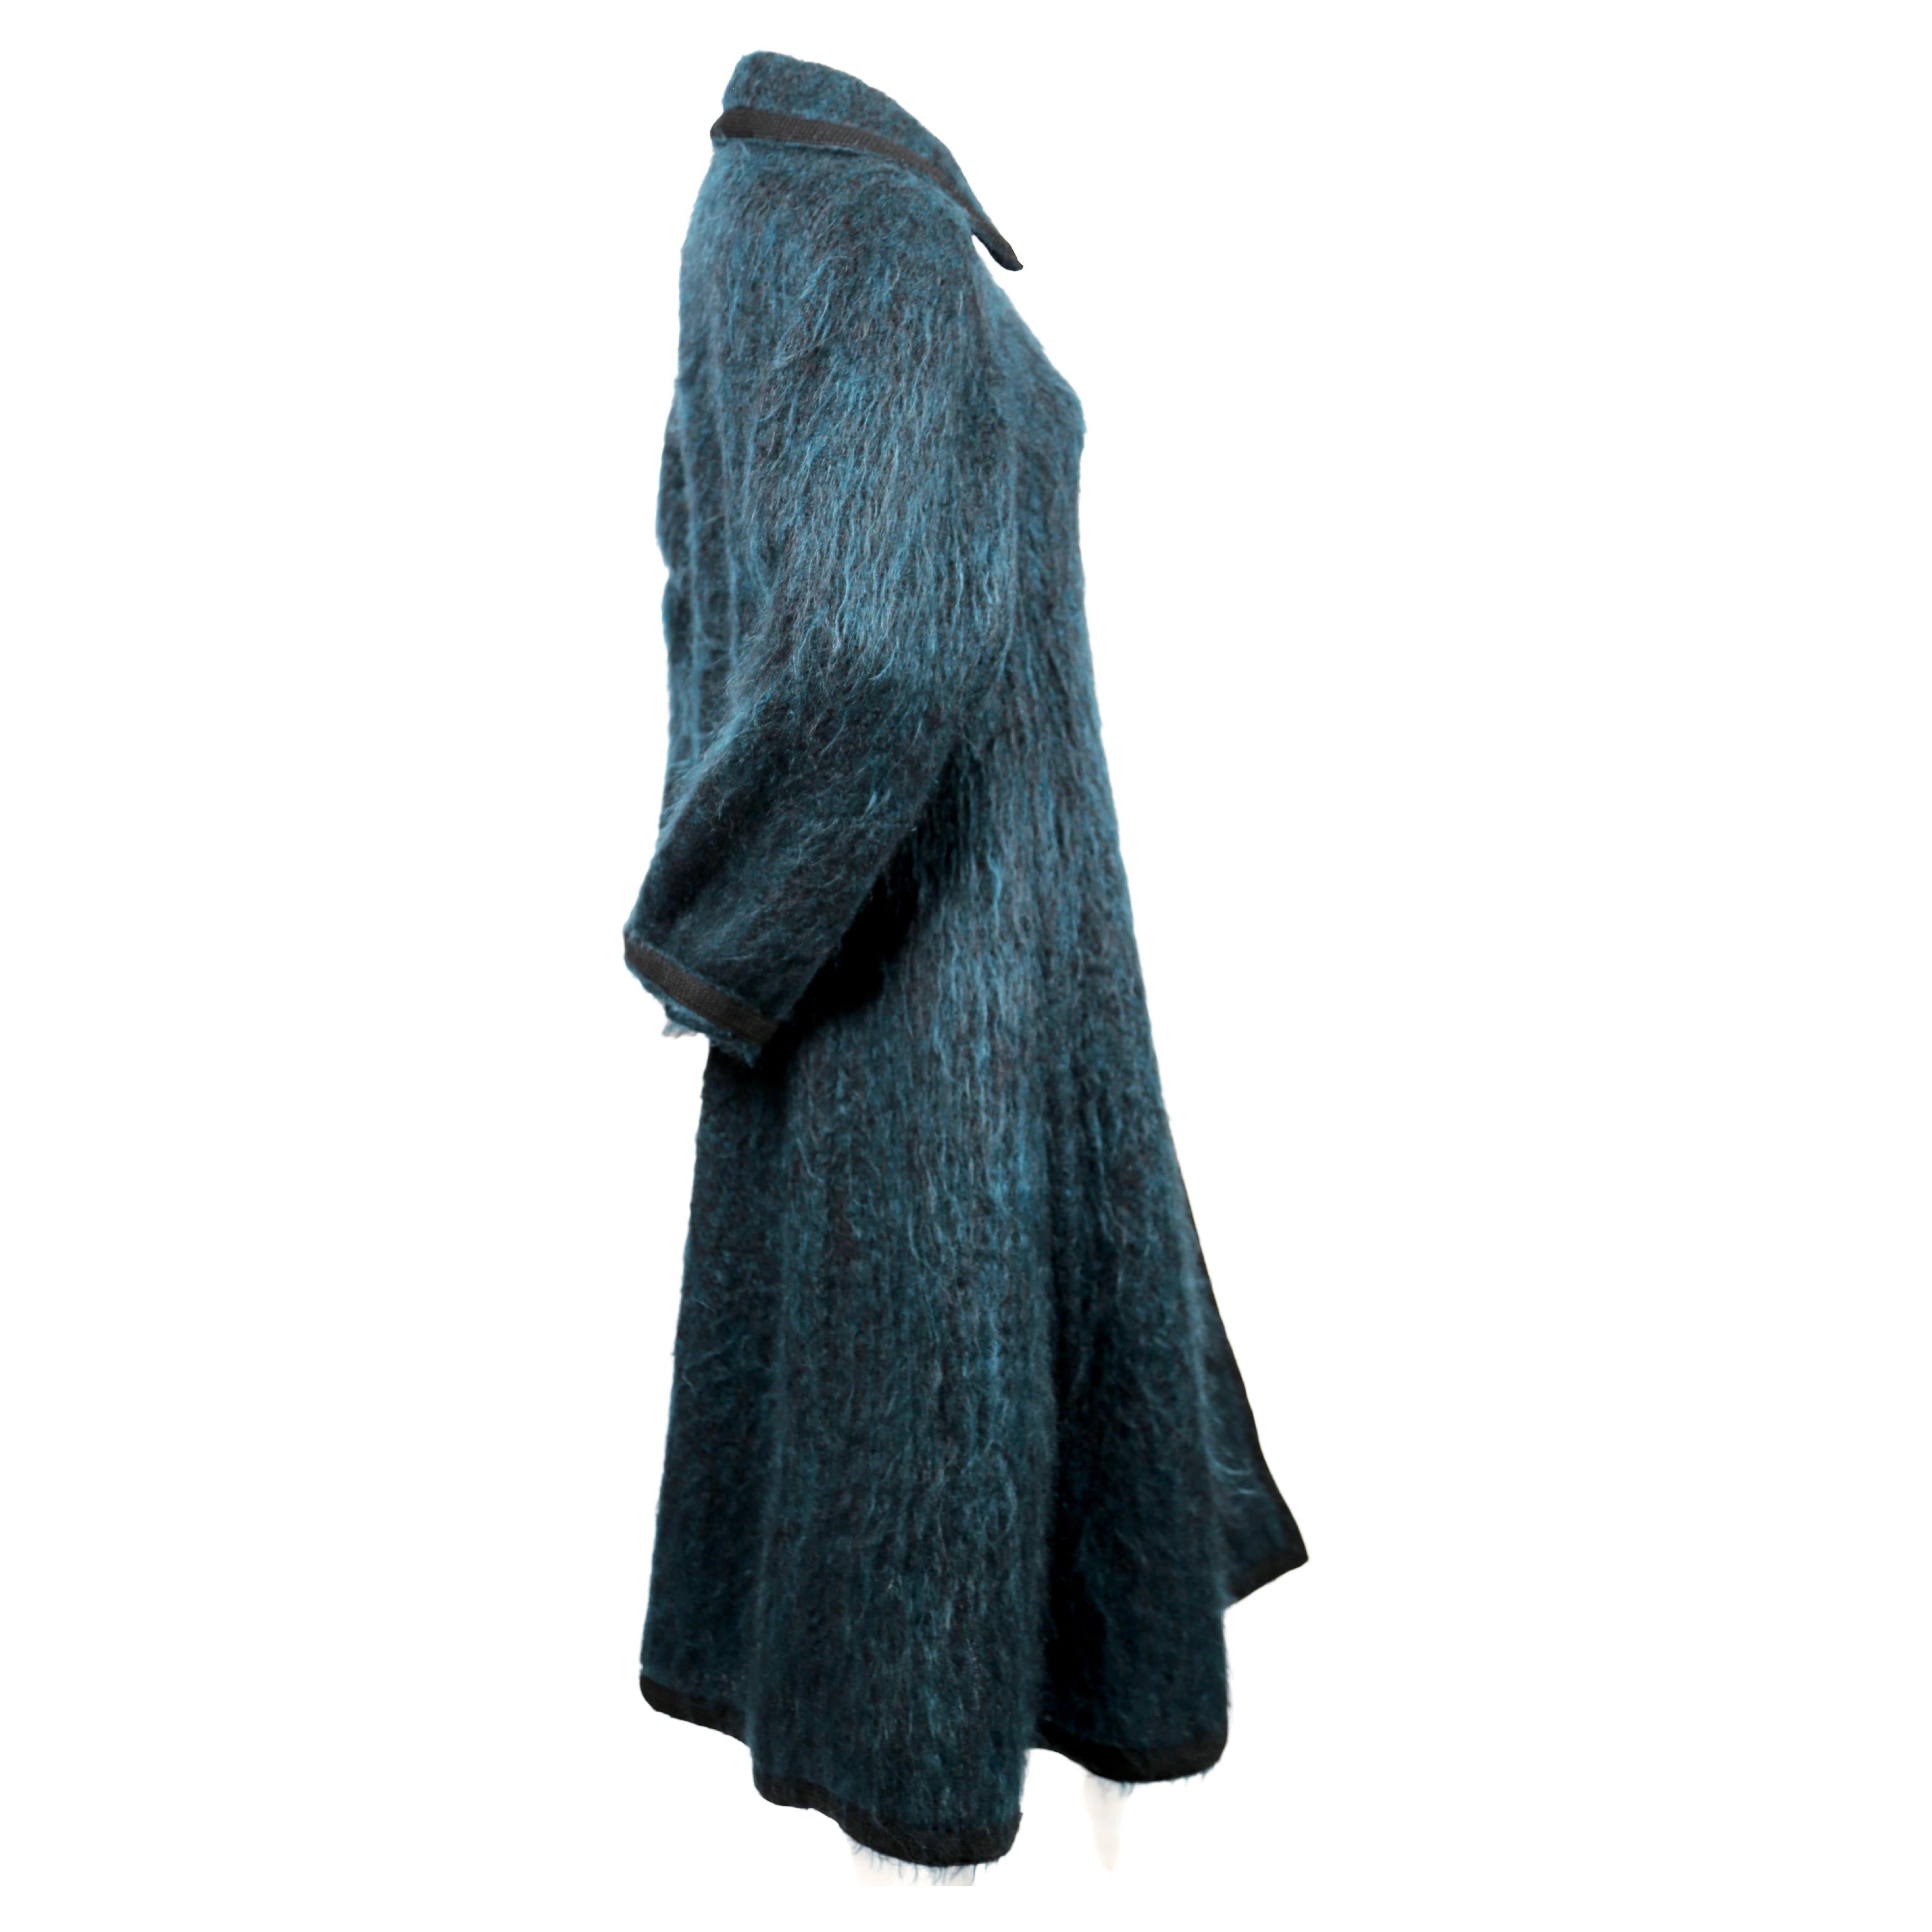 Dramatic, blue-green, brushed-wool coat with black trim and buttons from Yves Saint Laurent dating to the late 1960's. Coat is labeled a French size 38 and fits a US 4 or 6 (33-34